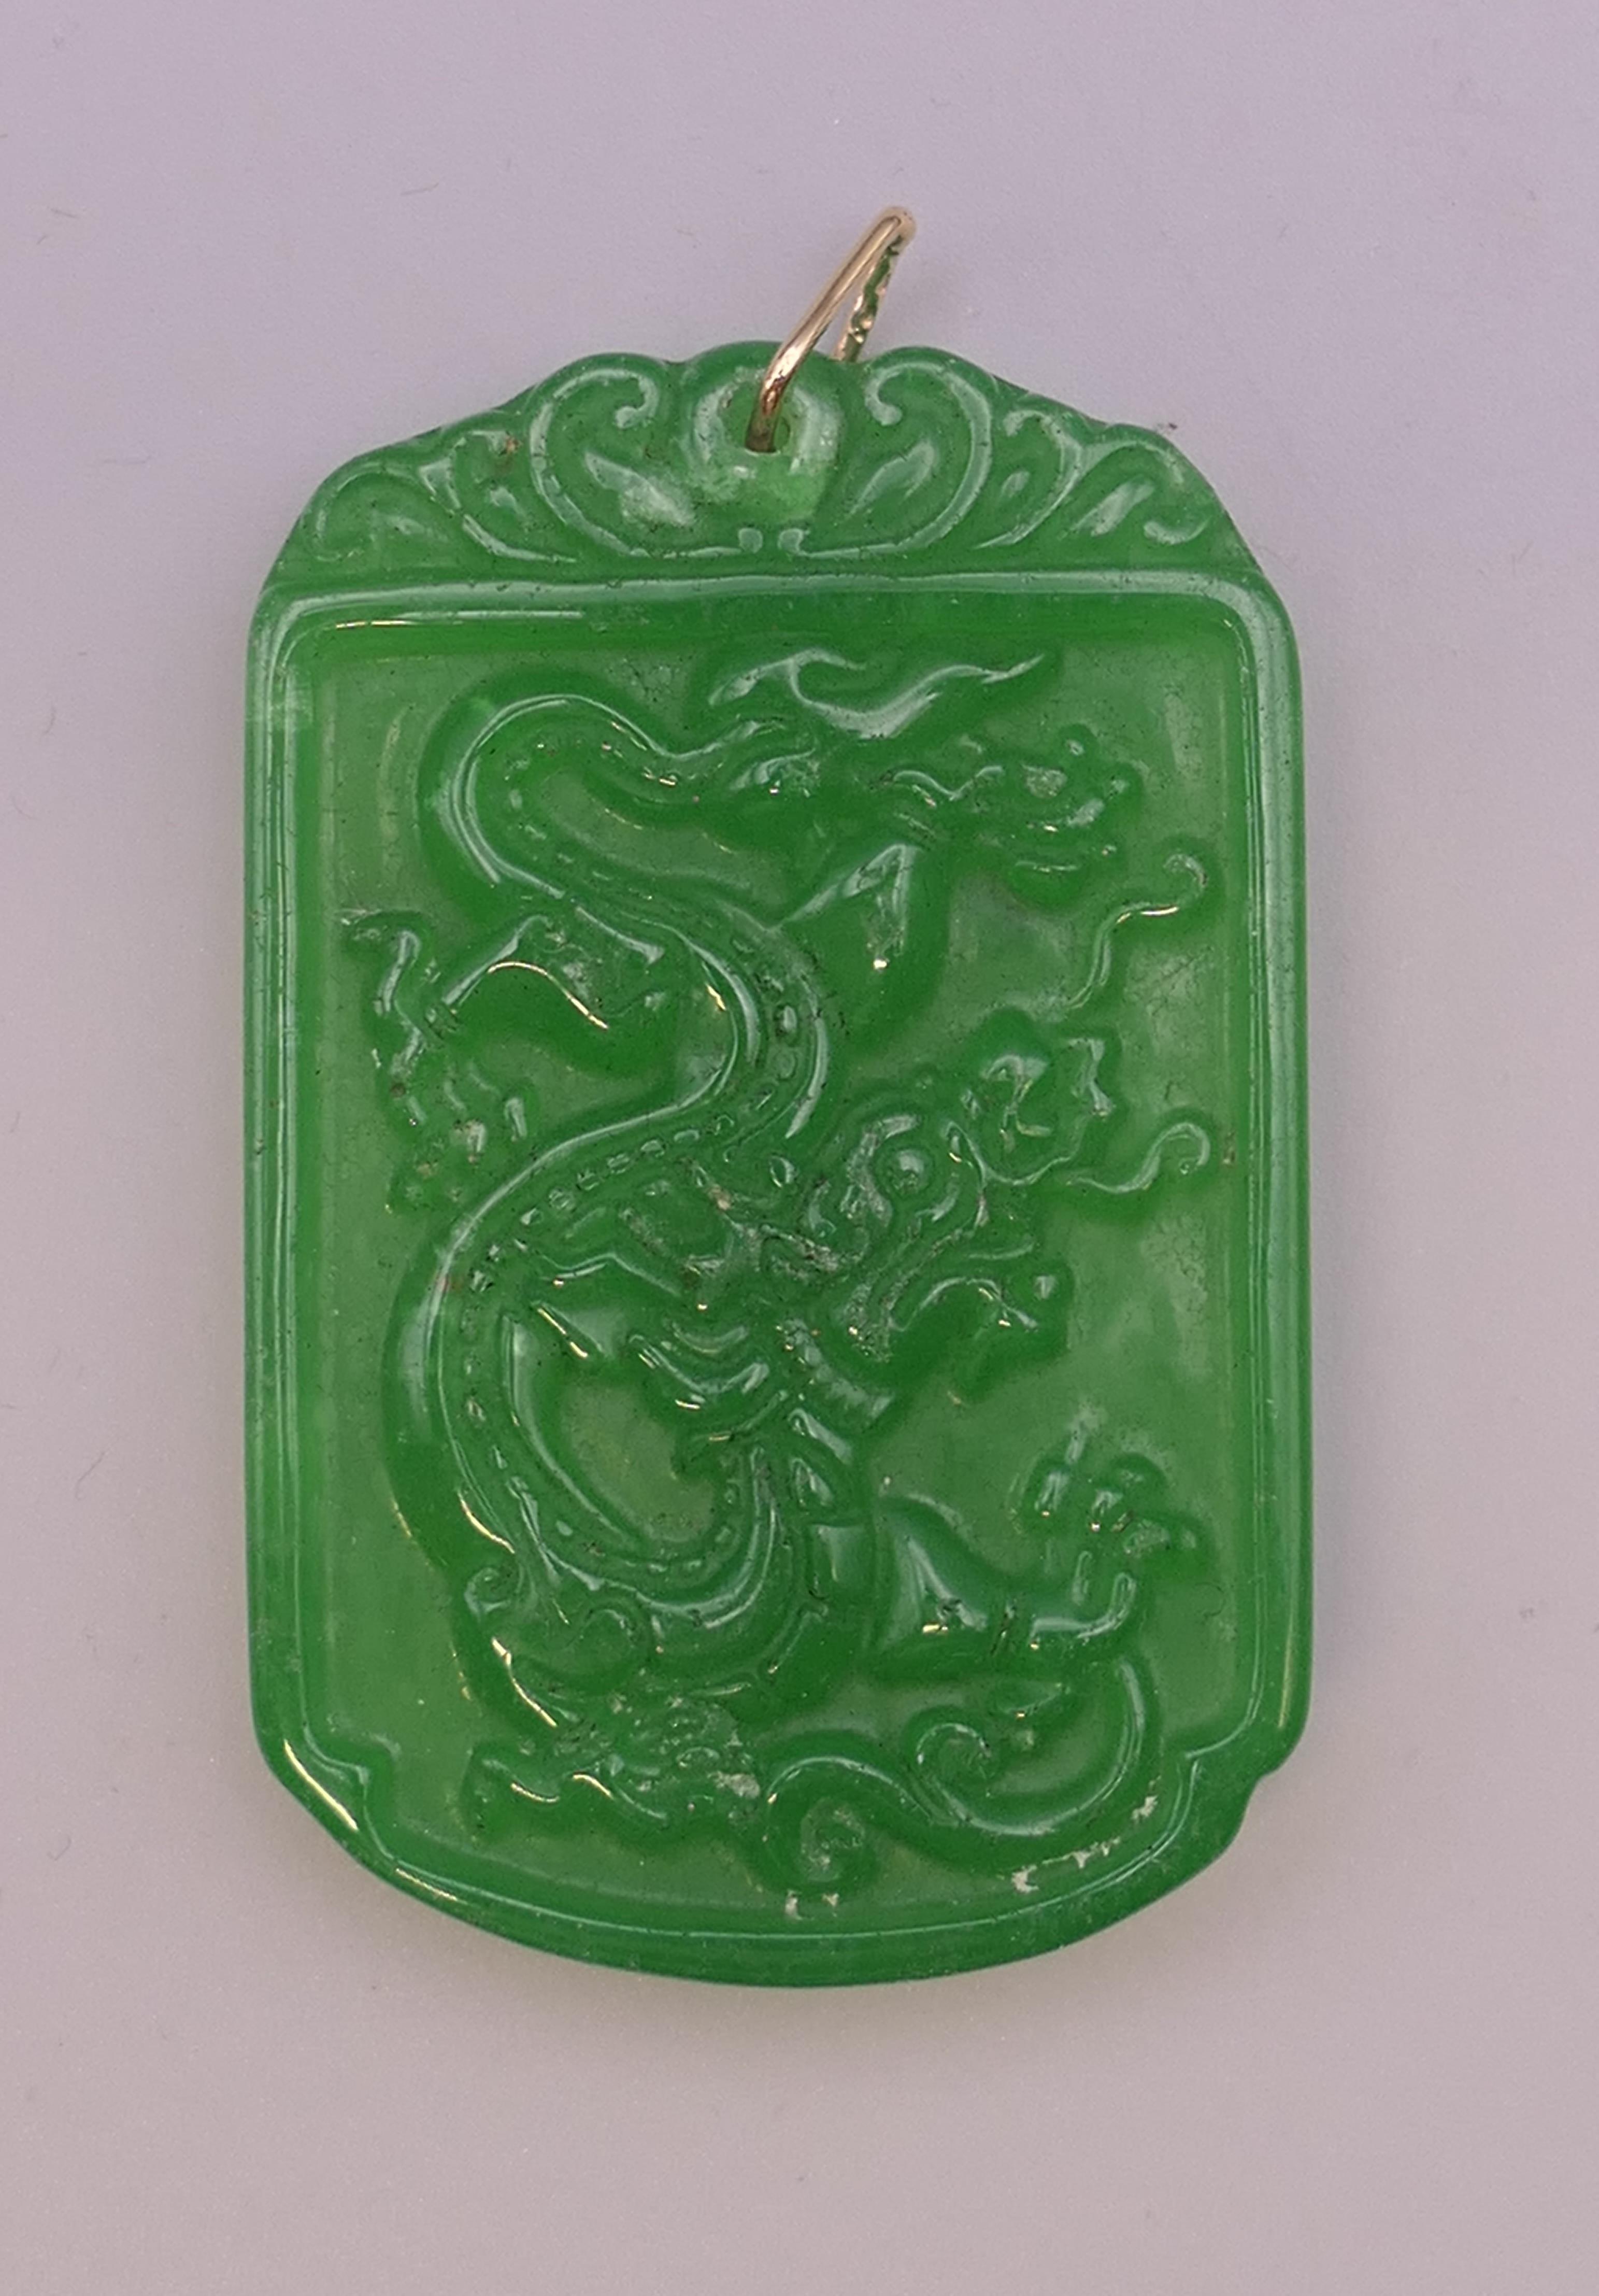 A gold mounted apple green jade pendant. 6 cm high. - Image 2 of 4